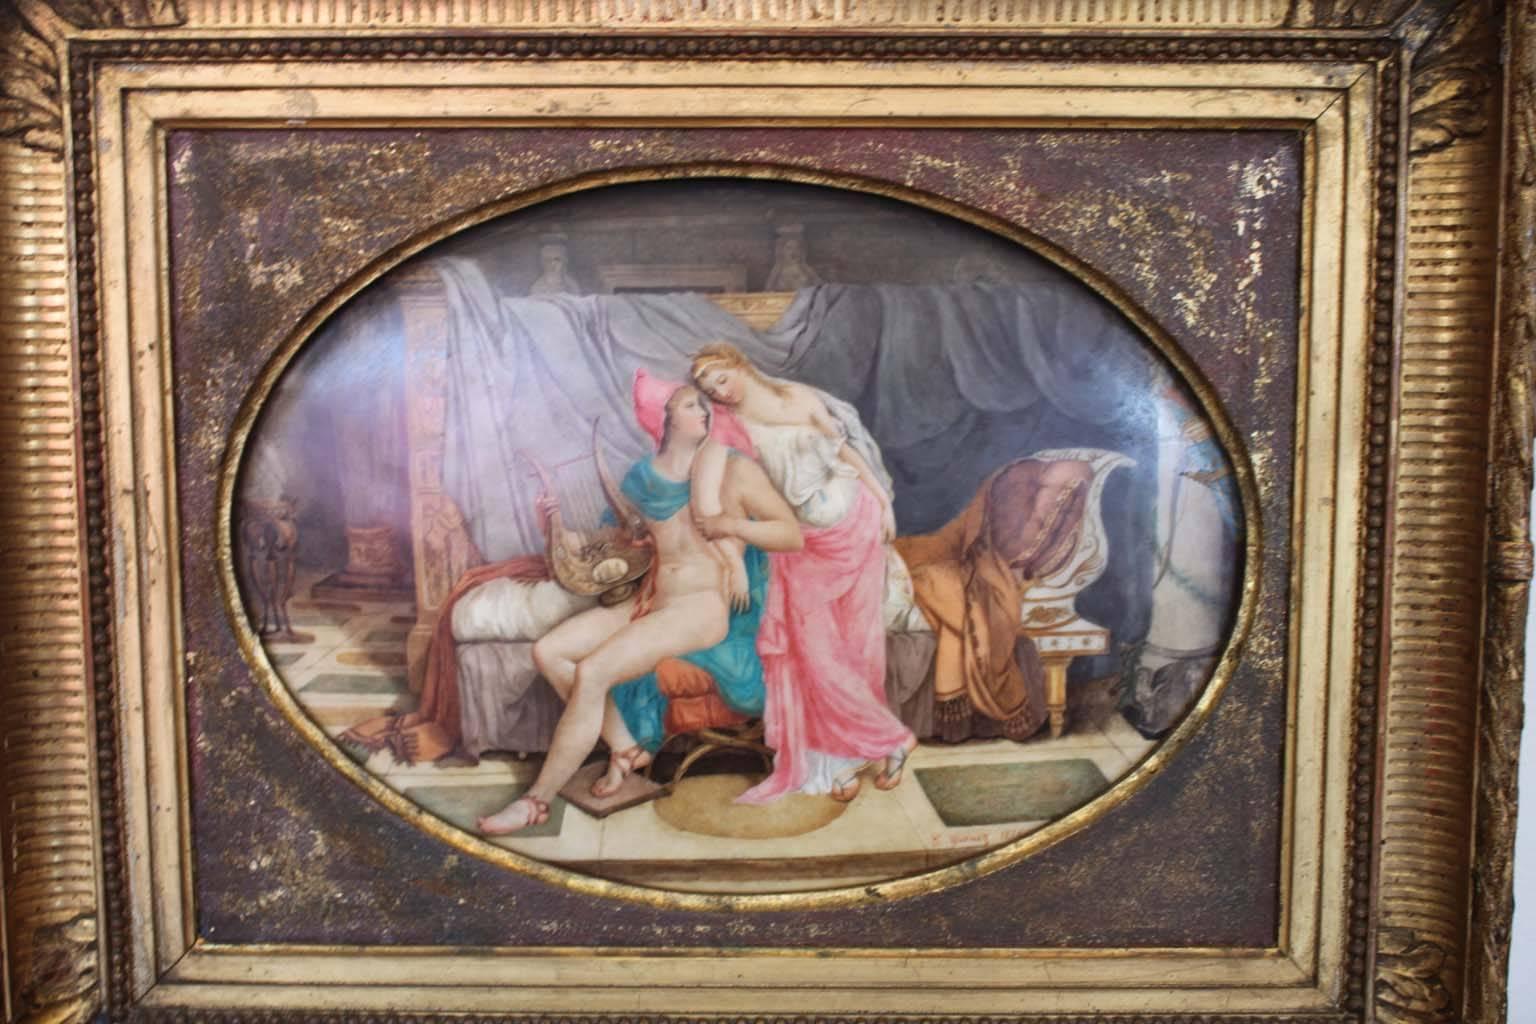 Painting on a oval porcelain plaque representing an antique scene, signed C Guenez. Date 1876. Framed.
Dimensions without frame: L 24cm, H 16.5cm
With frame: L 36cm, H 31cm, thickness 4cm.